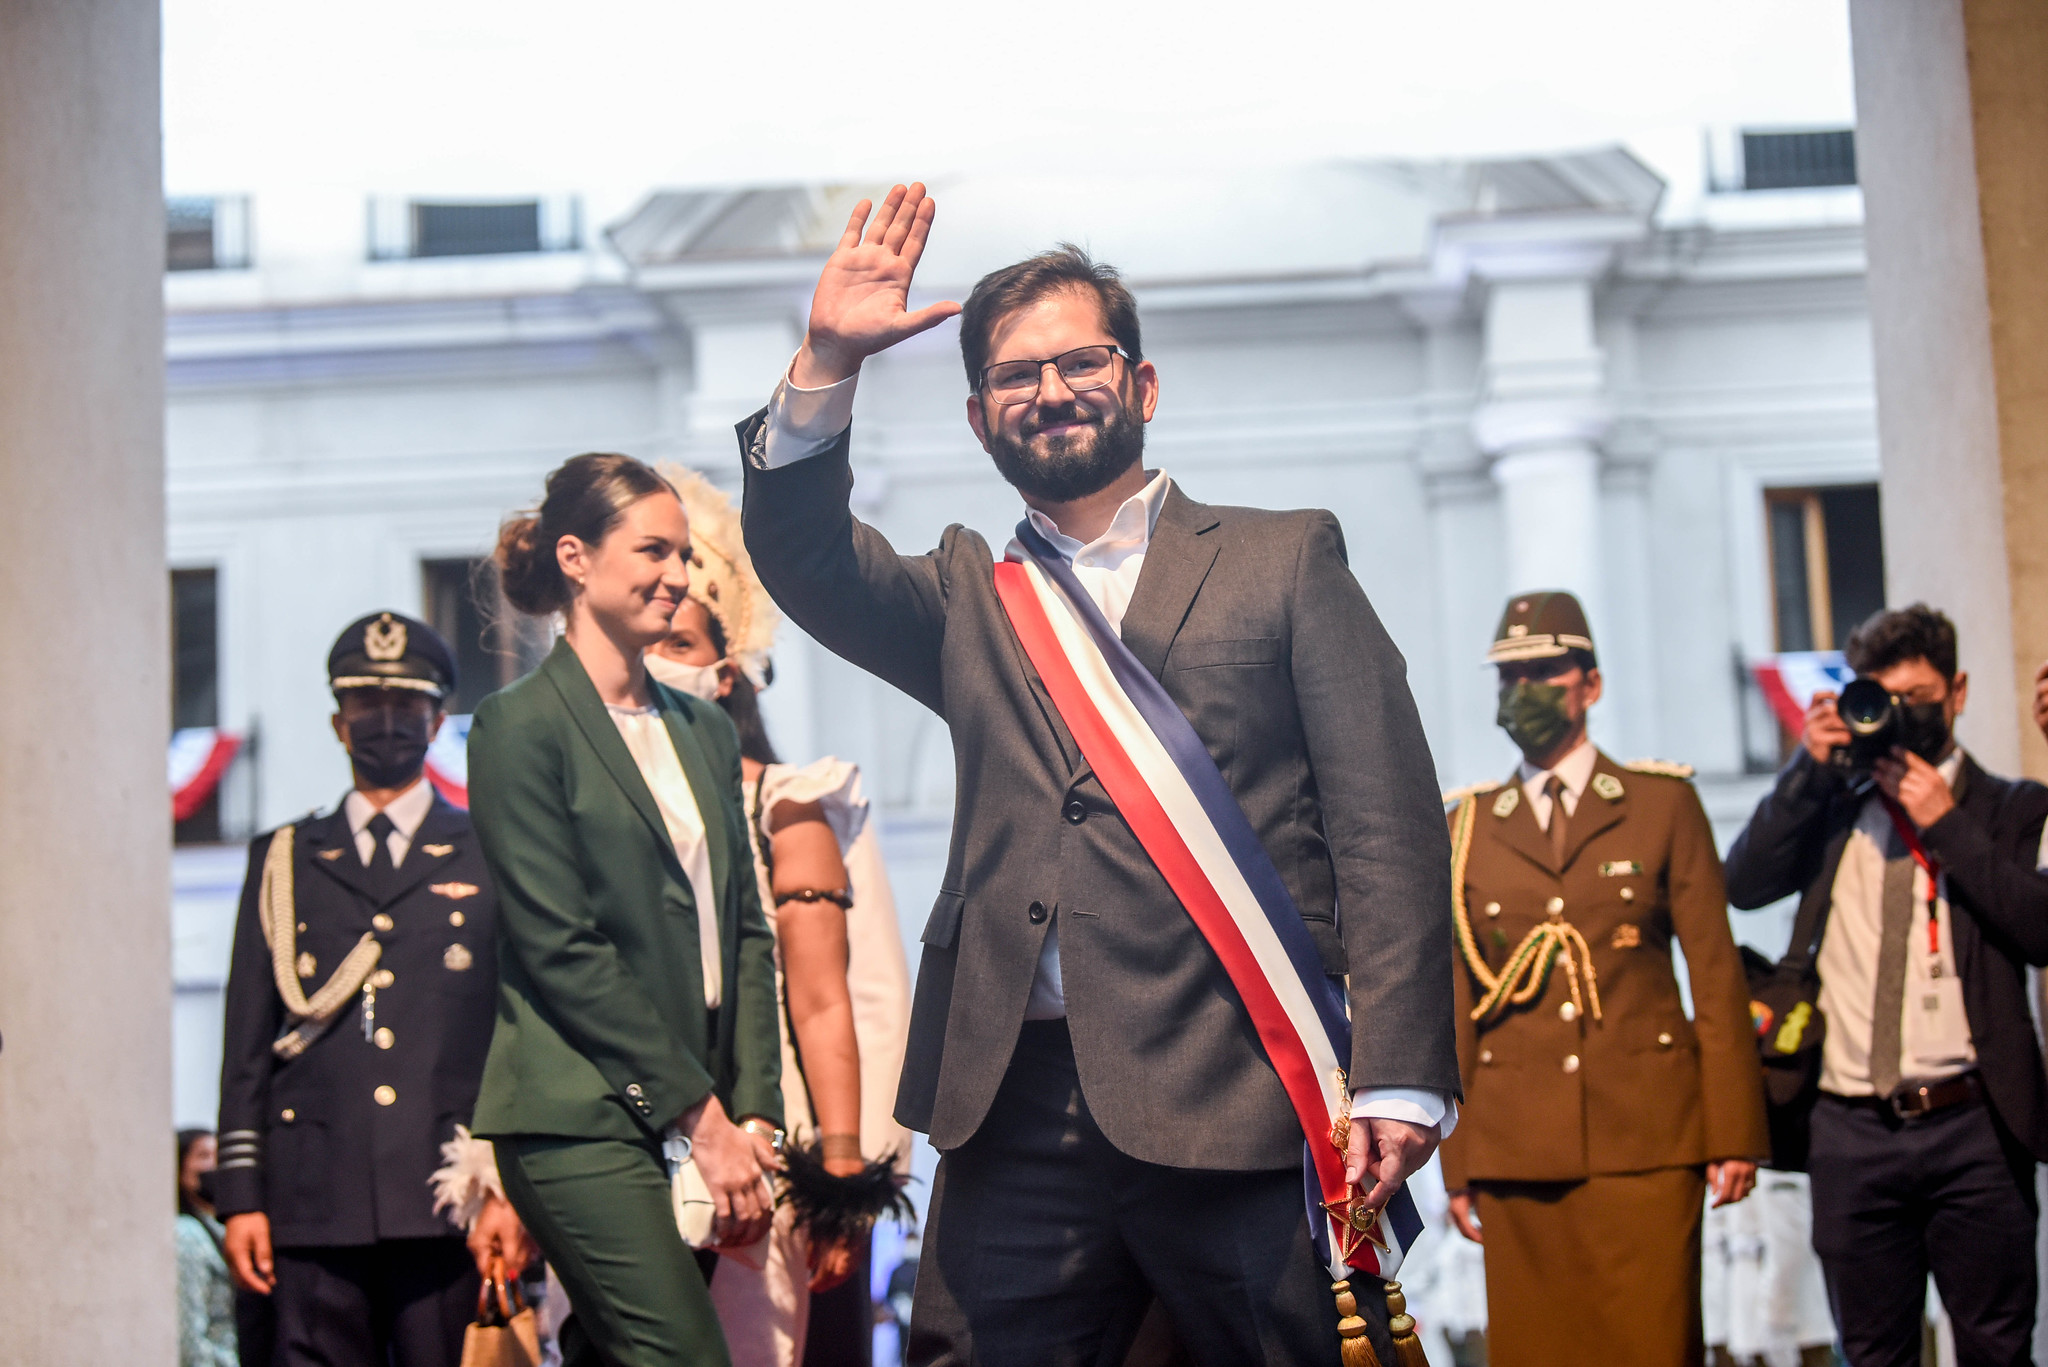 Chilean President Gabriel Boric arrives at the La Moneda palace to give his first speech as president, March 11, 2022. (Vocería de Gobierno/CC BY-SA 2.0)